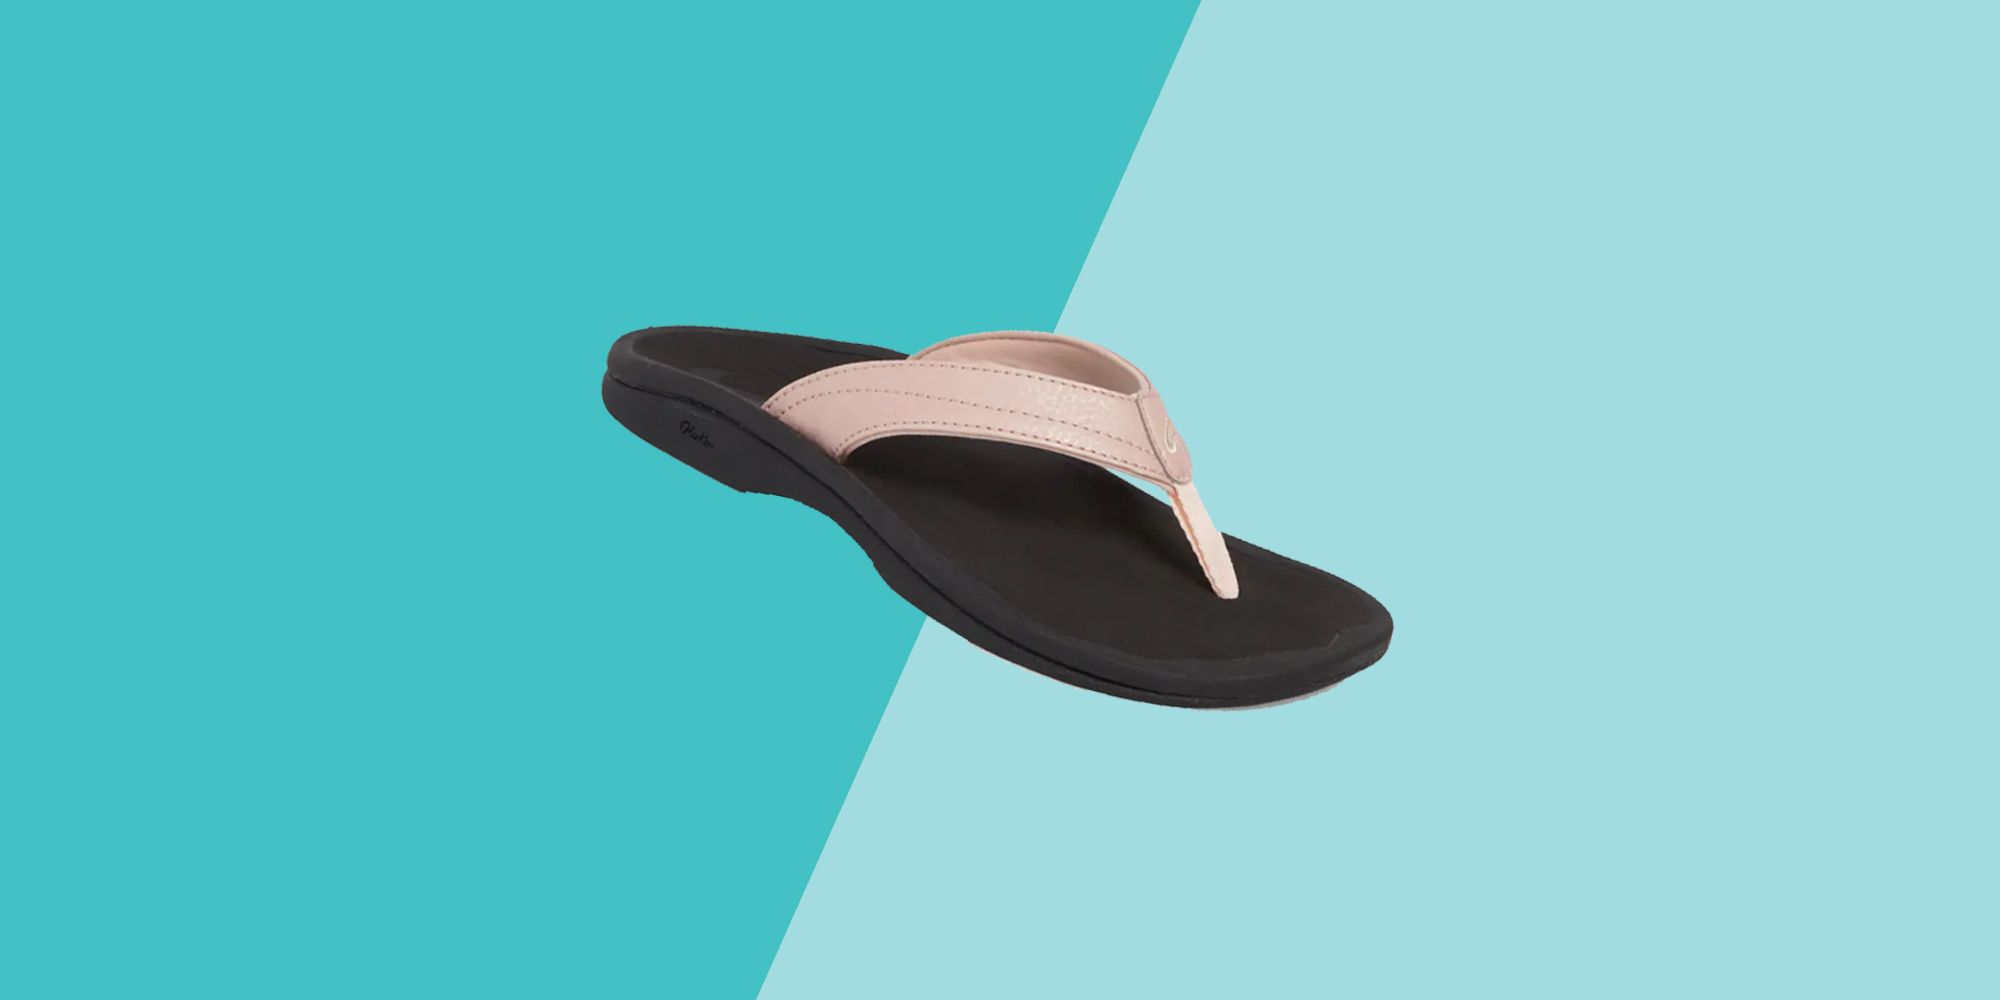 These Skechers Memory Foam Sandals Feel Supportive, According to Shoppers